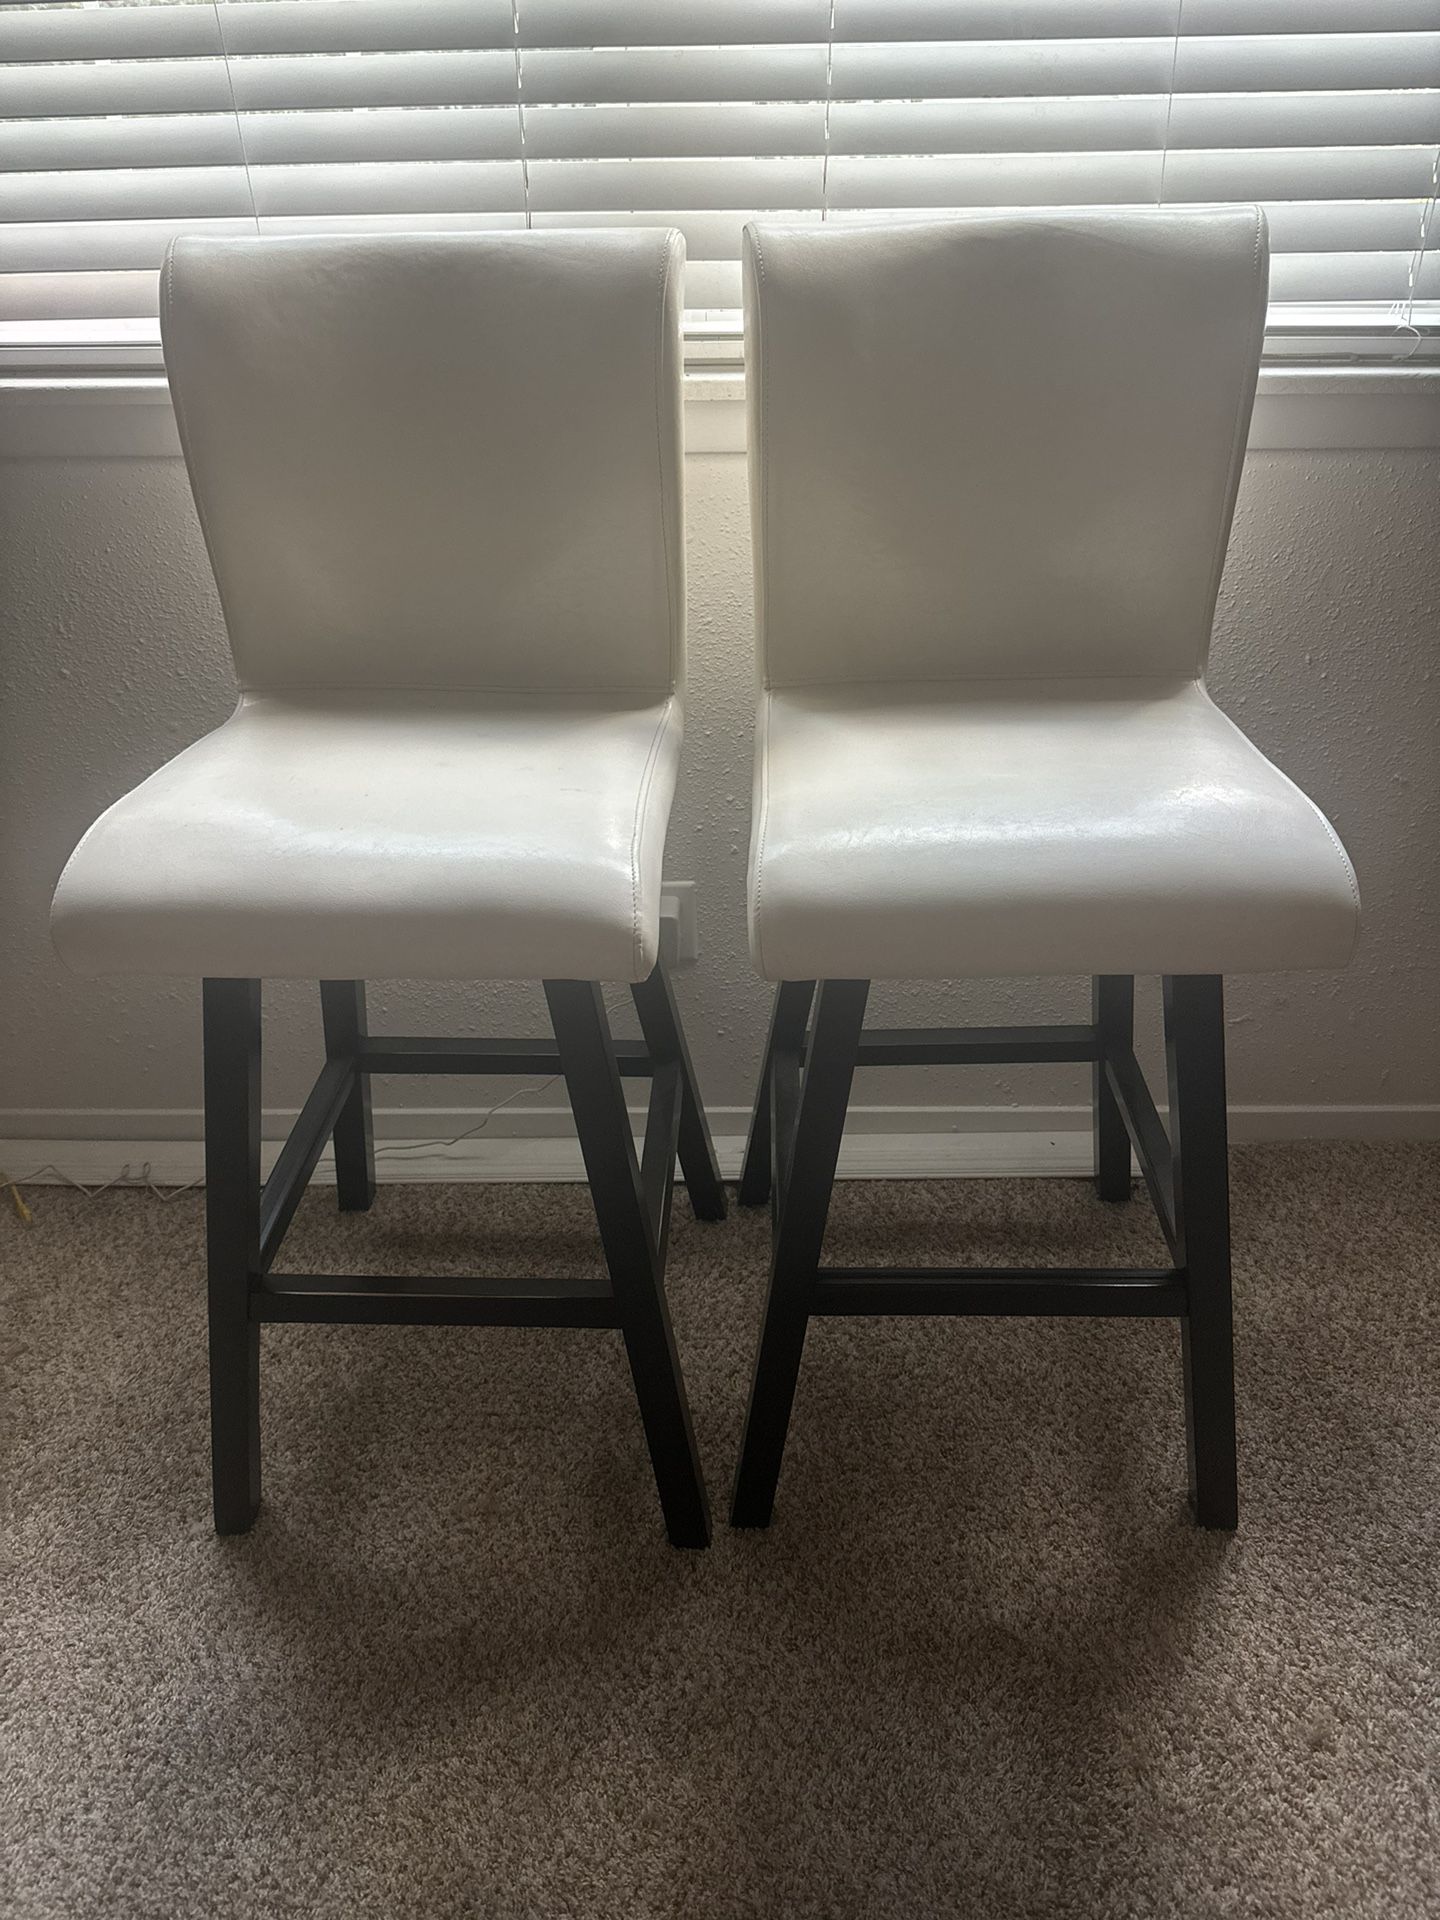 Bar Counter Stool Chairs